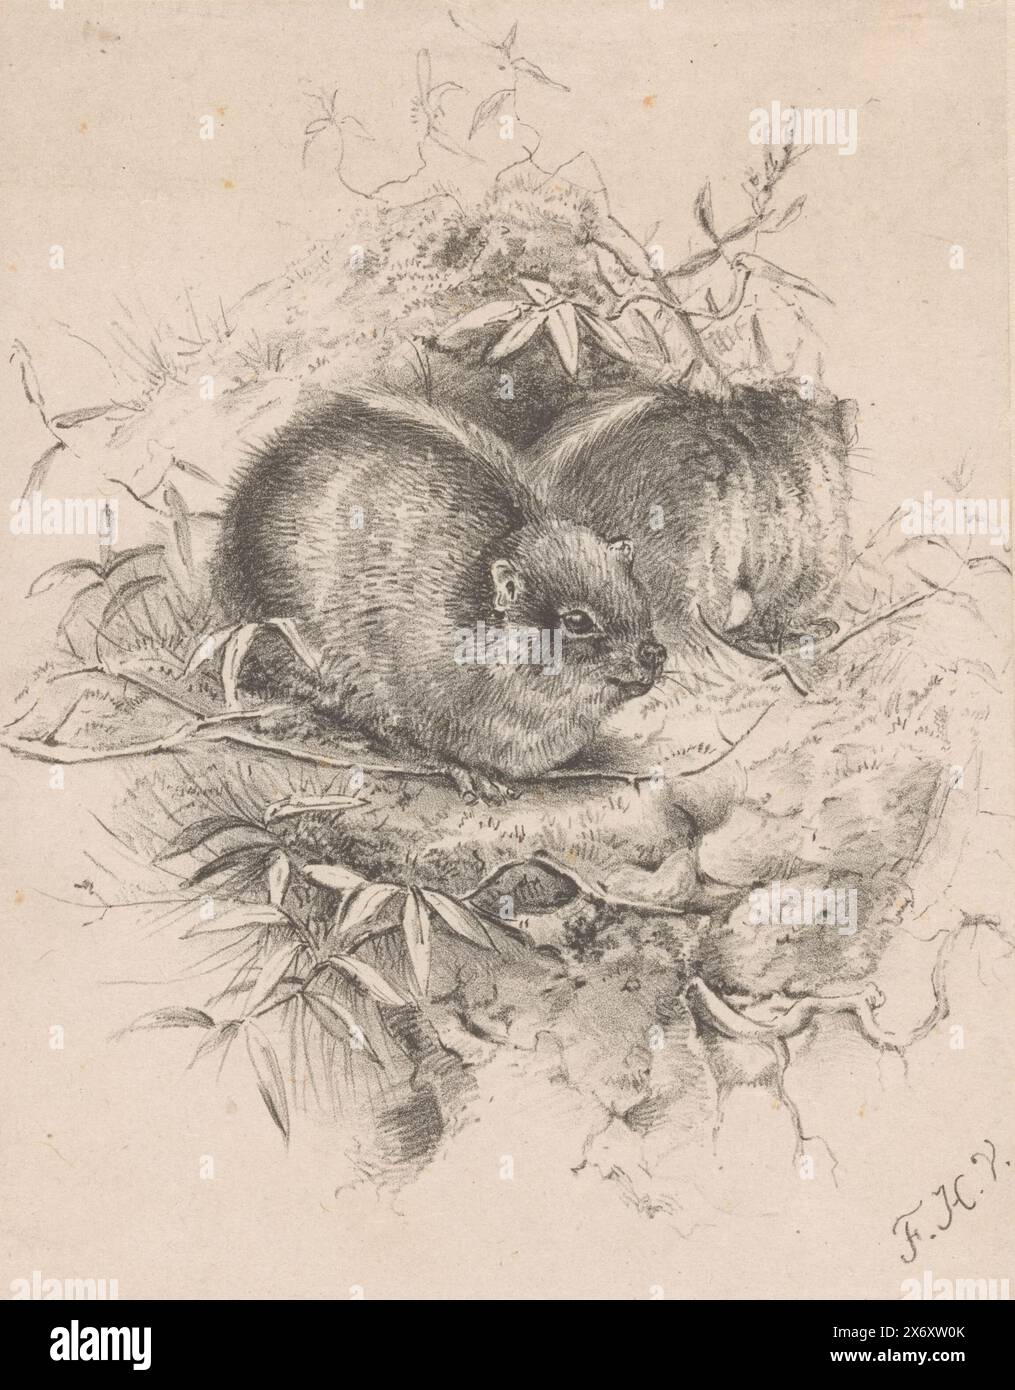 Two hyraxes, print, print maker: Floris Verster, (mentioned on object), 1871 - 1927, Japanese paper, height, 238 mm × width, 197 mm Stock Photo